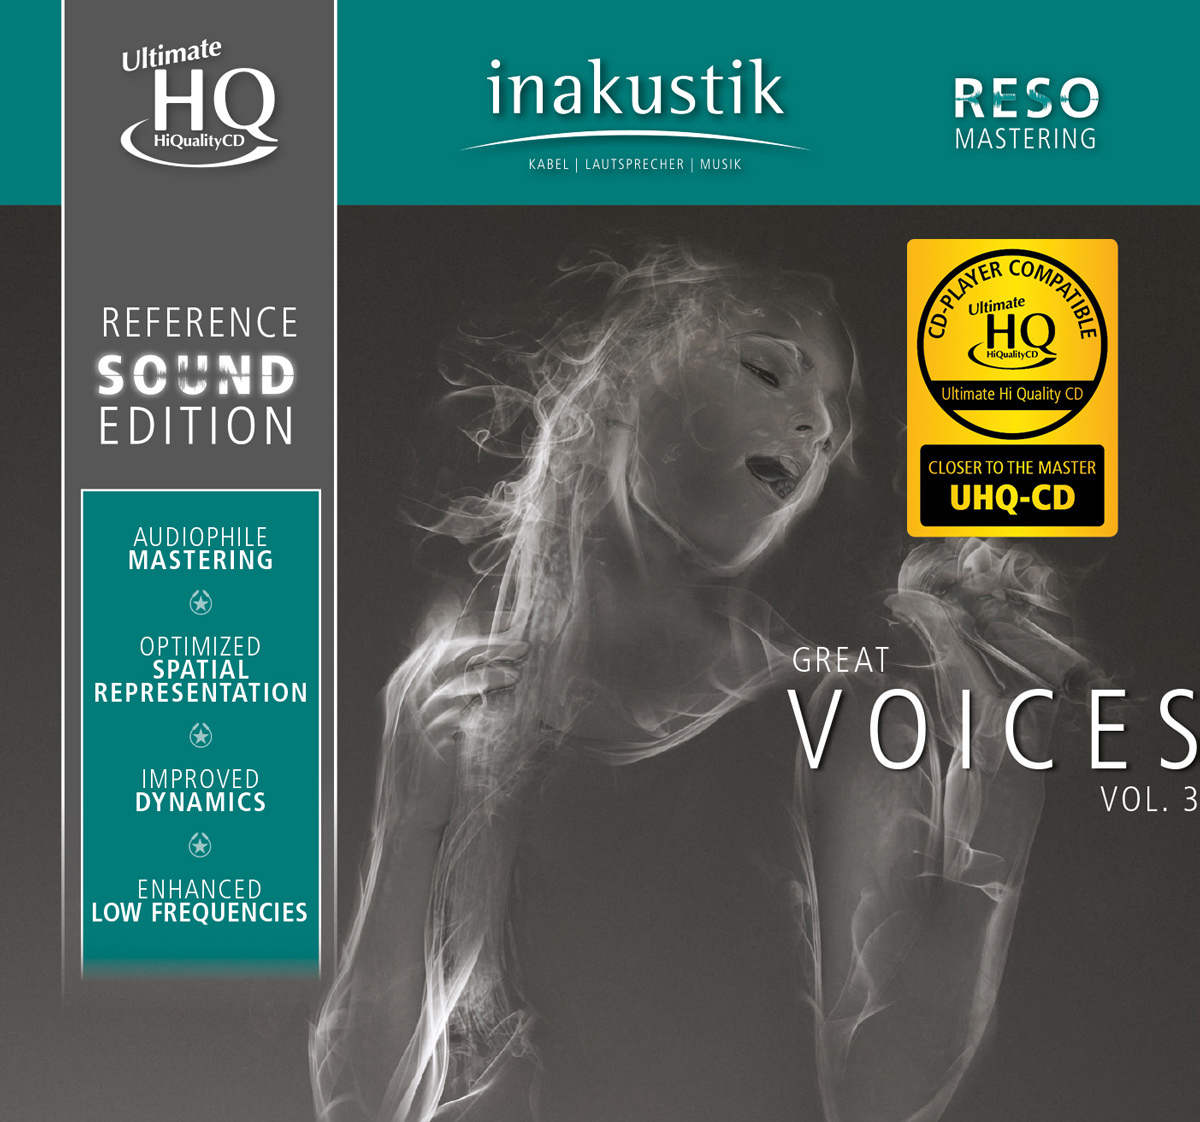 Inakustik CD. Great Voice. In-Akustik reference Sound Edition.. Inakustik various - die stereo hortest LP. Great voices